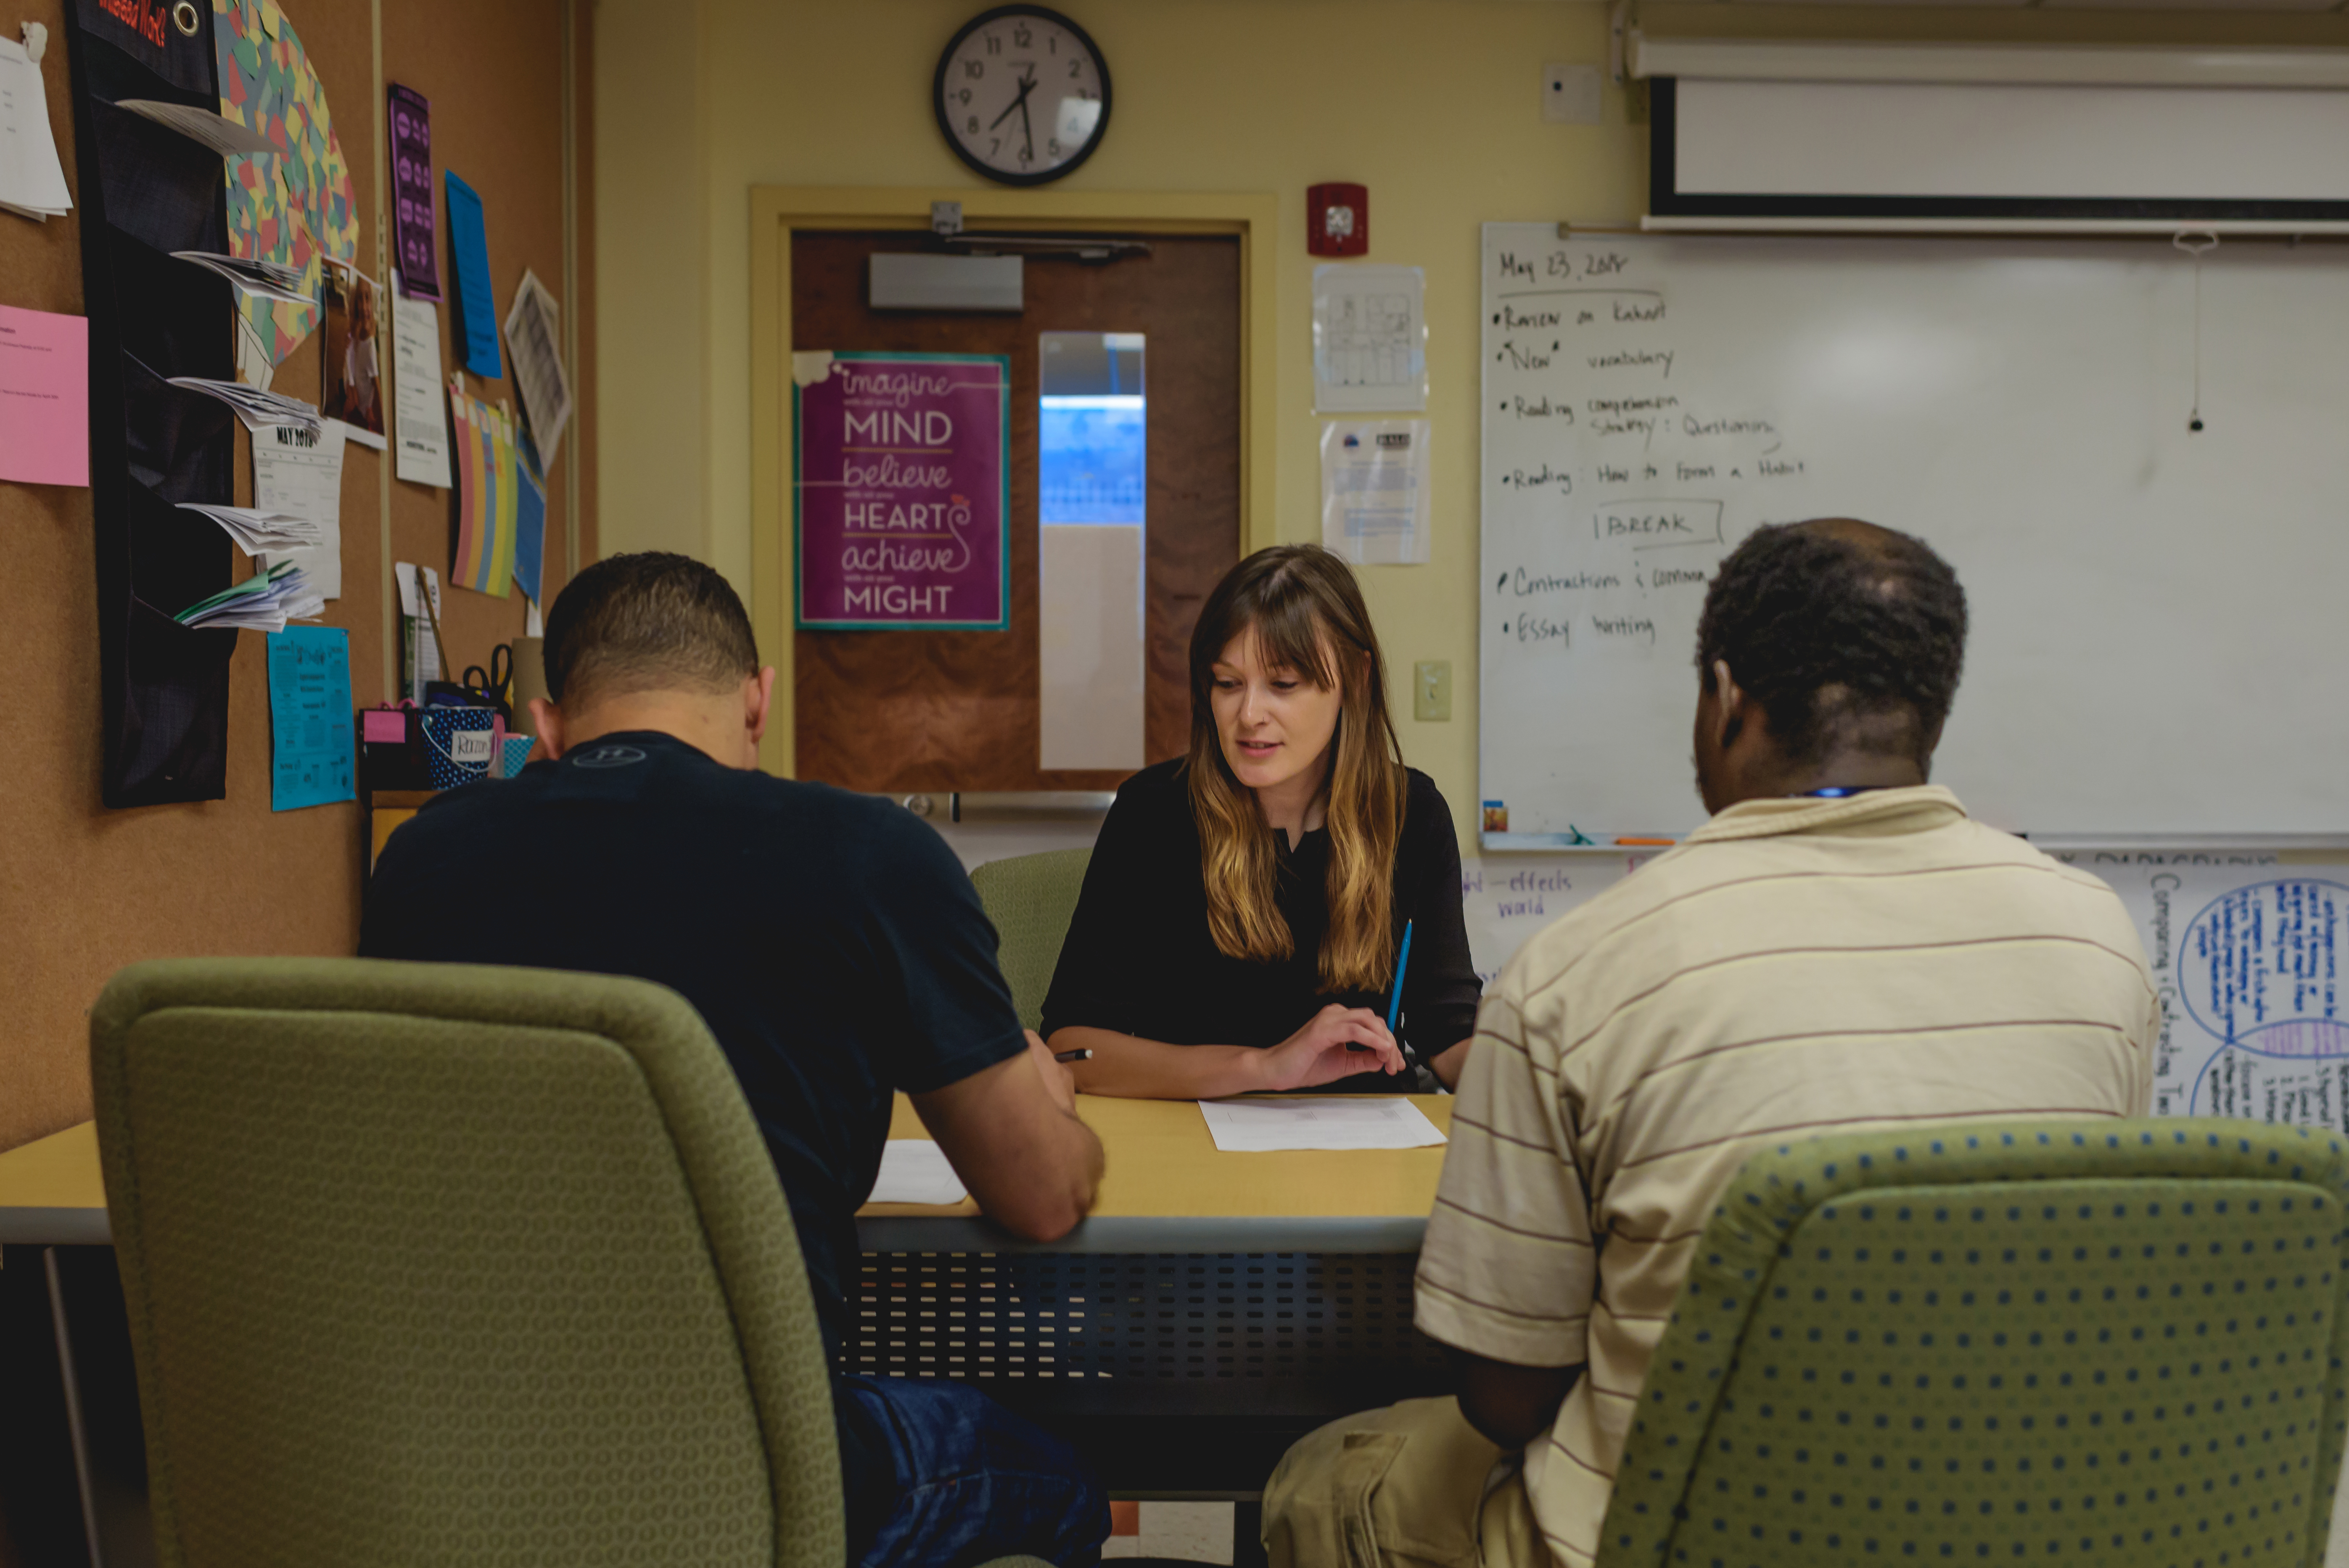 Kristi Kaeppel, a graduate student in the Neag School of Education, teaching adult students. (Photo by Rob Deza)